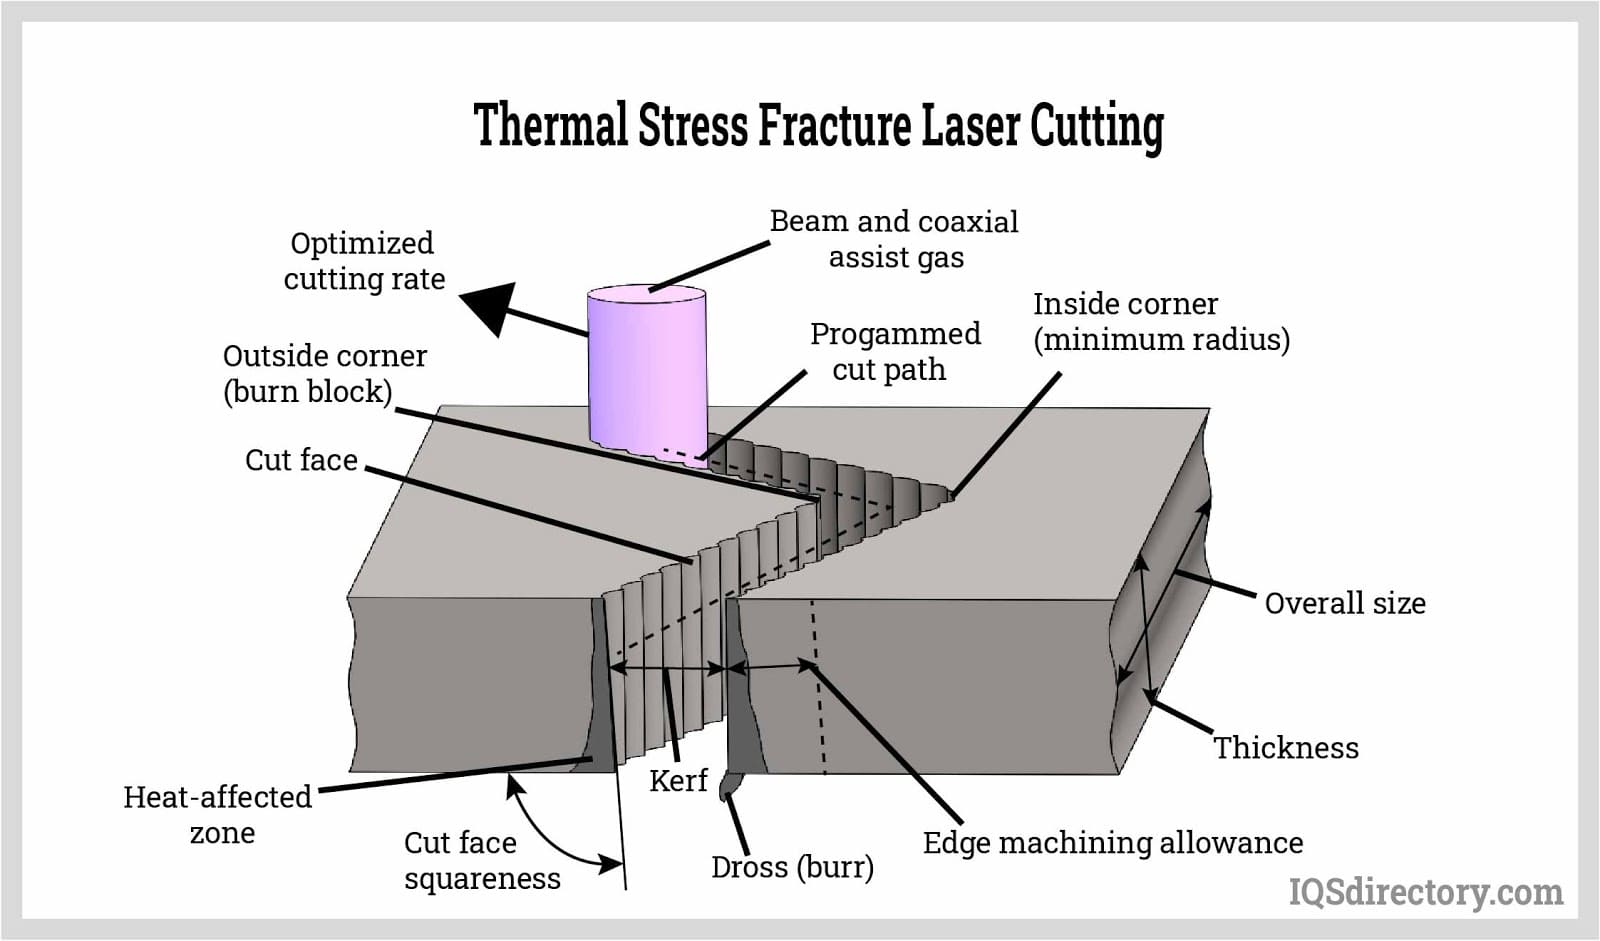 Thermal Stress Fracture Laser Cutting